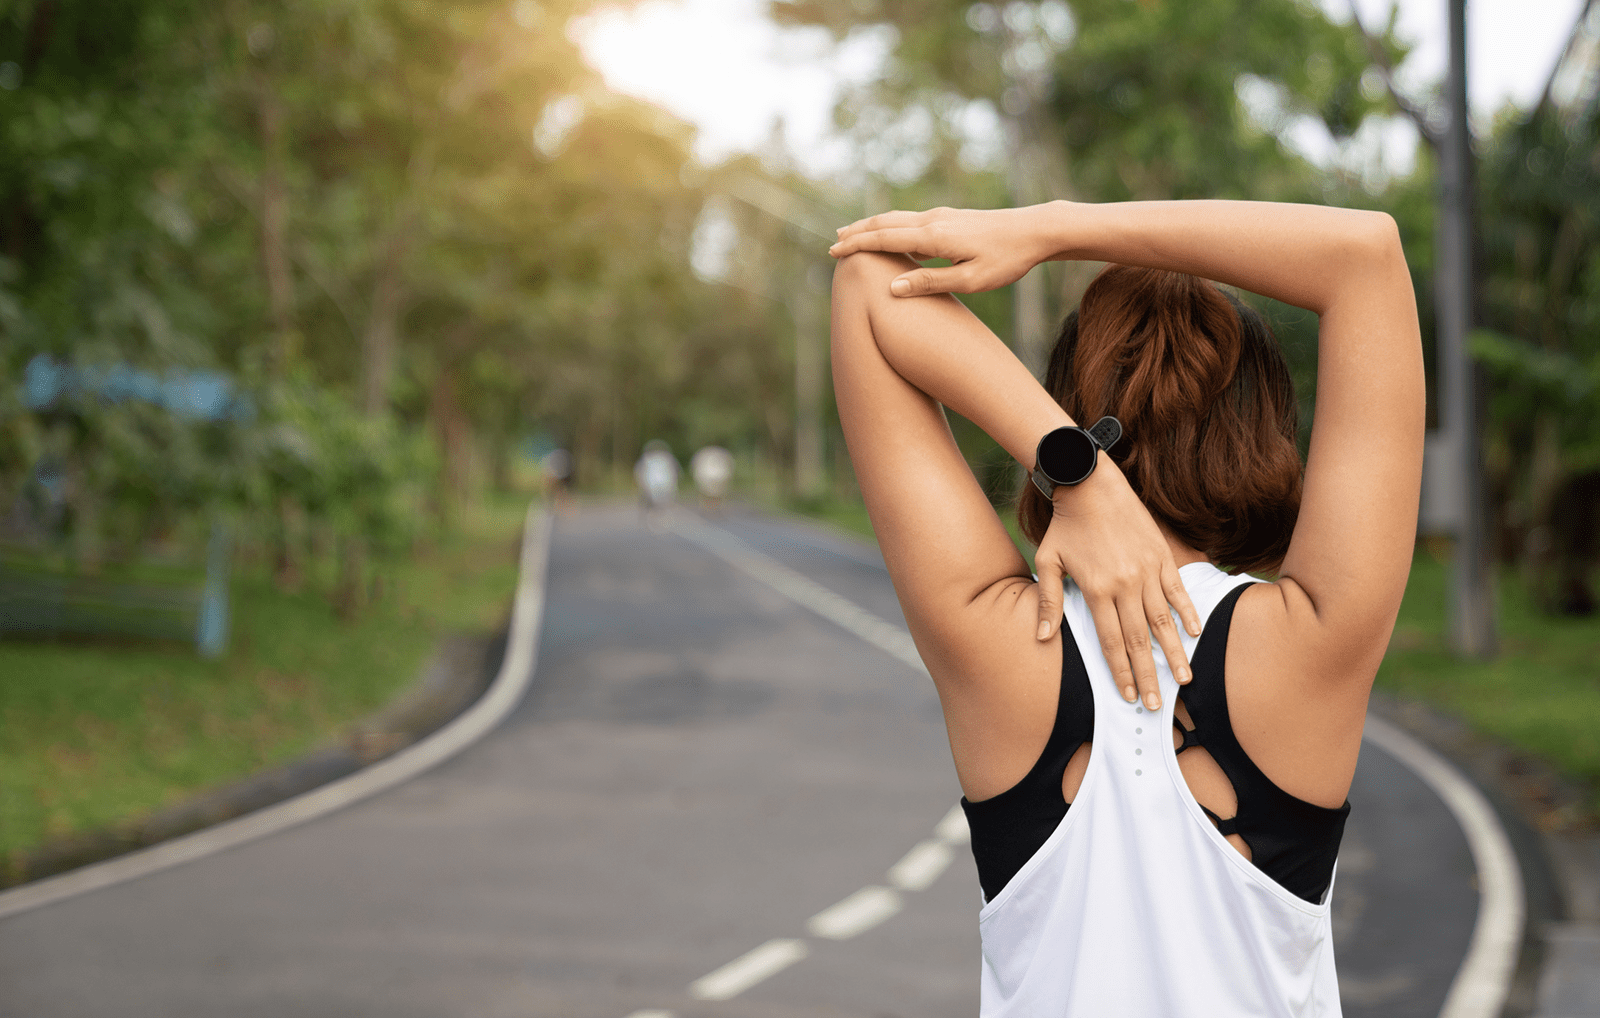 Woman stretching on the side of a road about to exercise